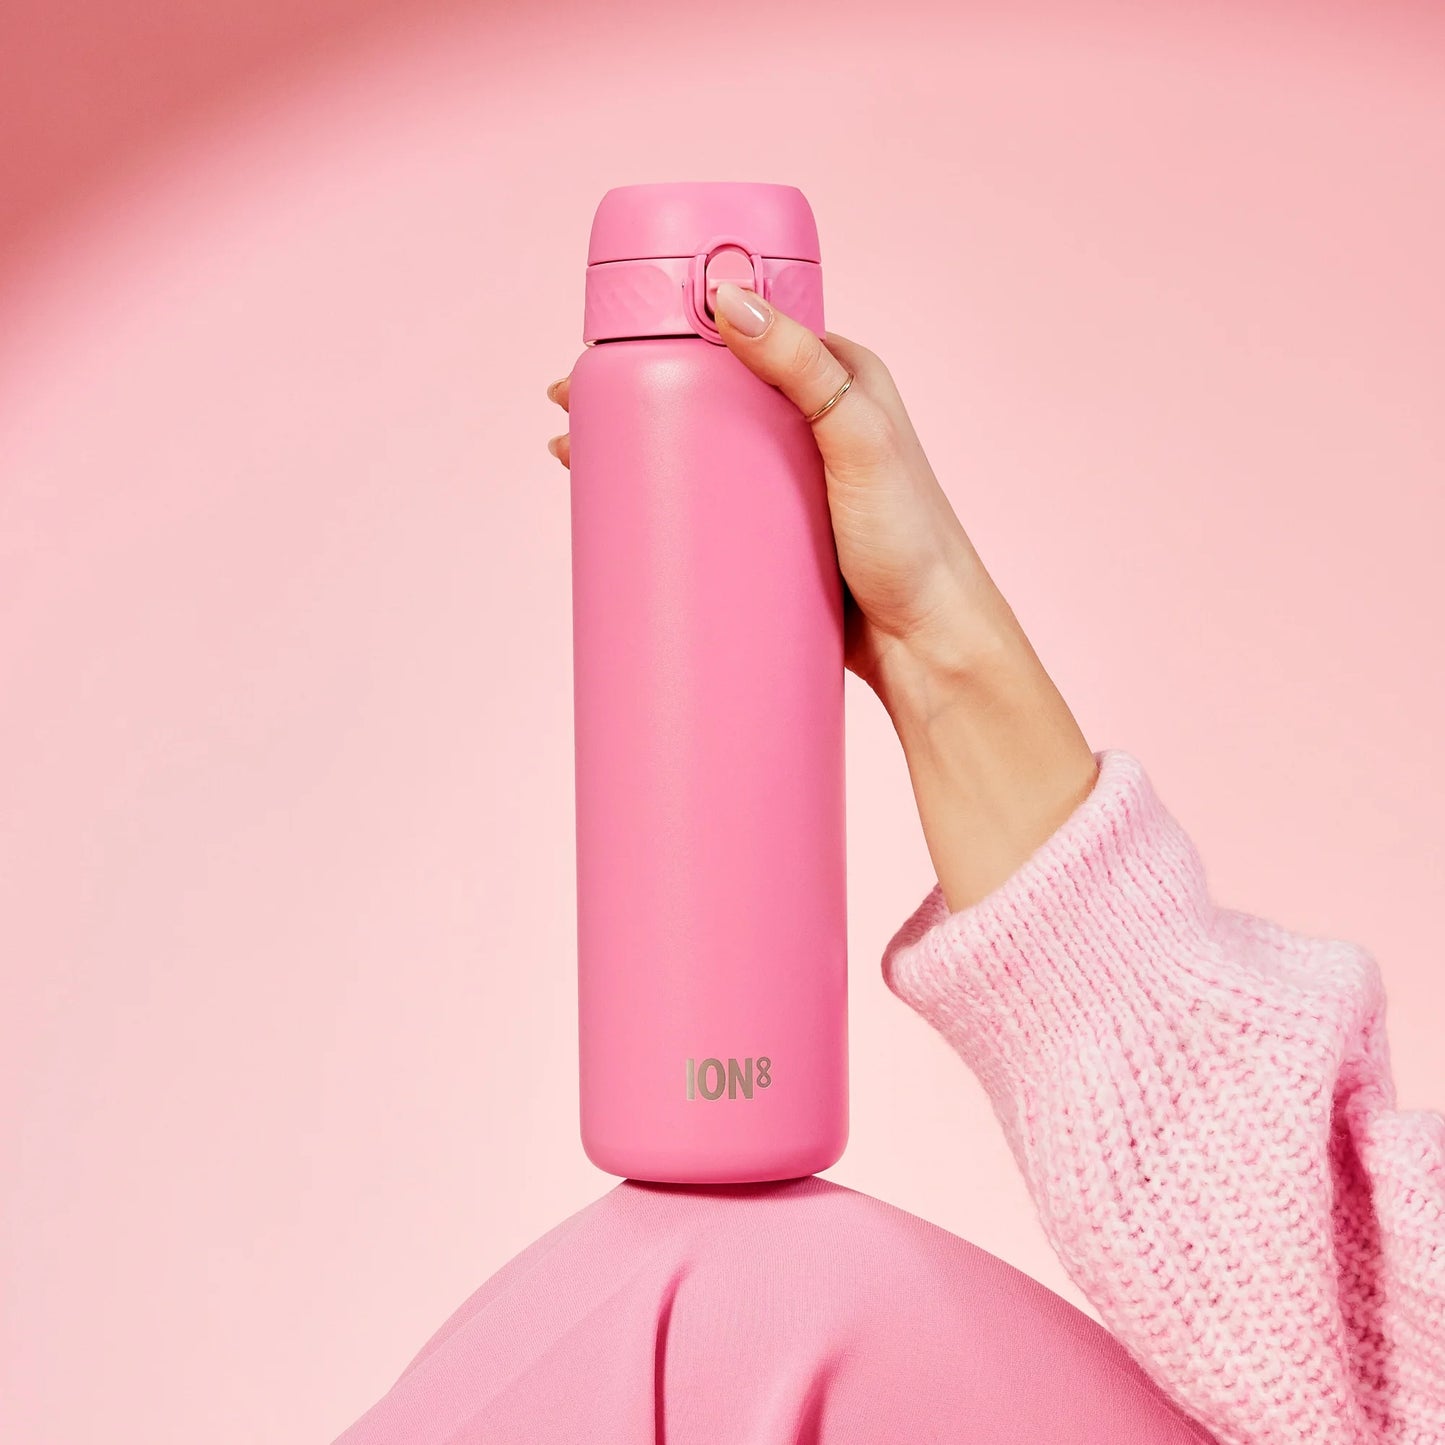 Leak Proof 1 Litre Thermal Water Bottle, Vacuum Insulated, Rose Bloom, 1L